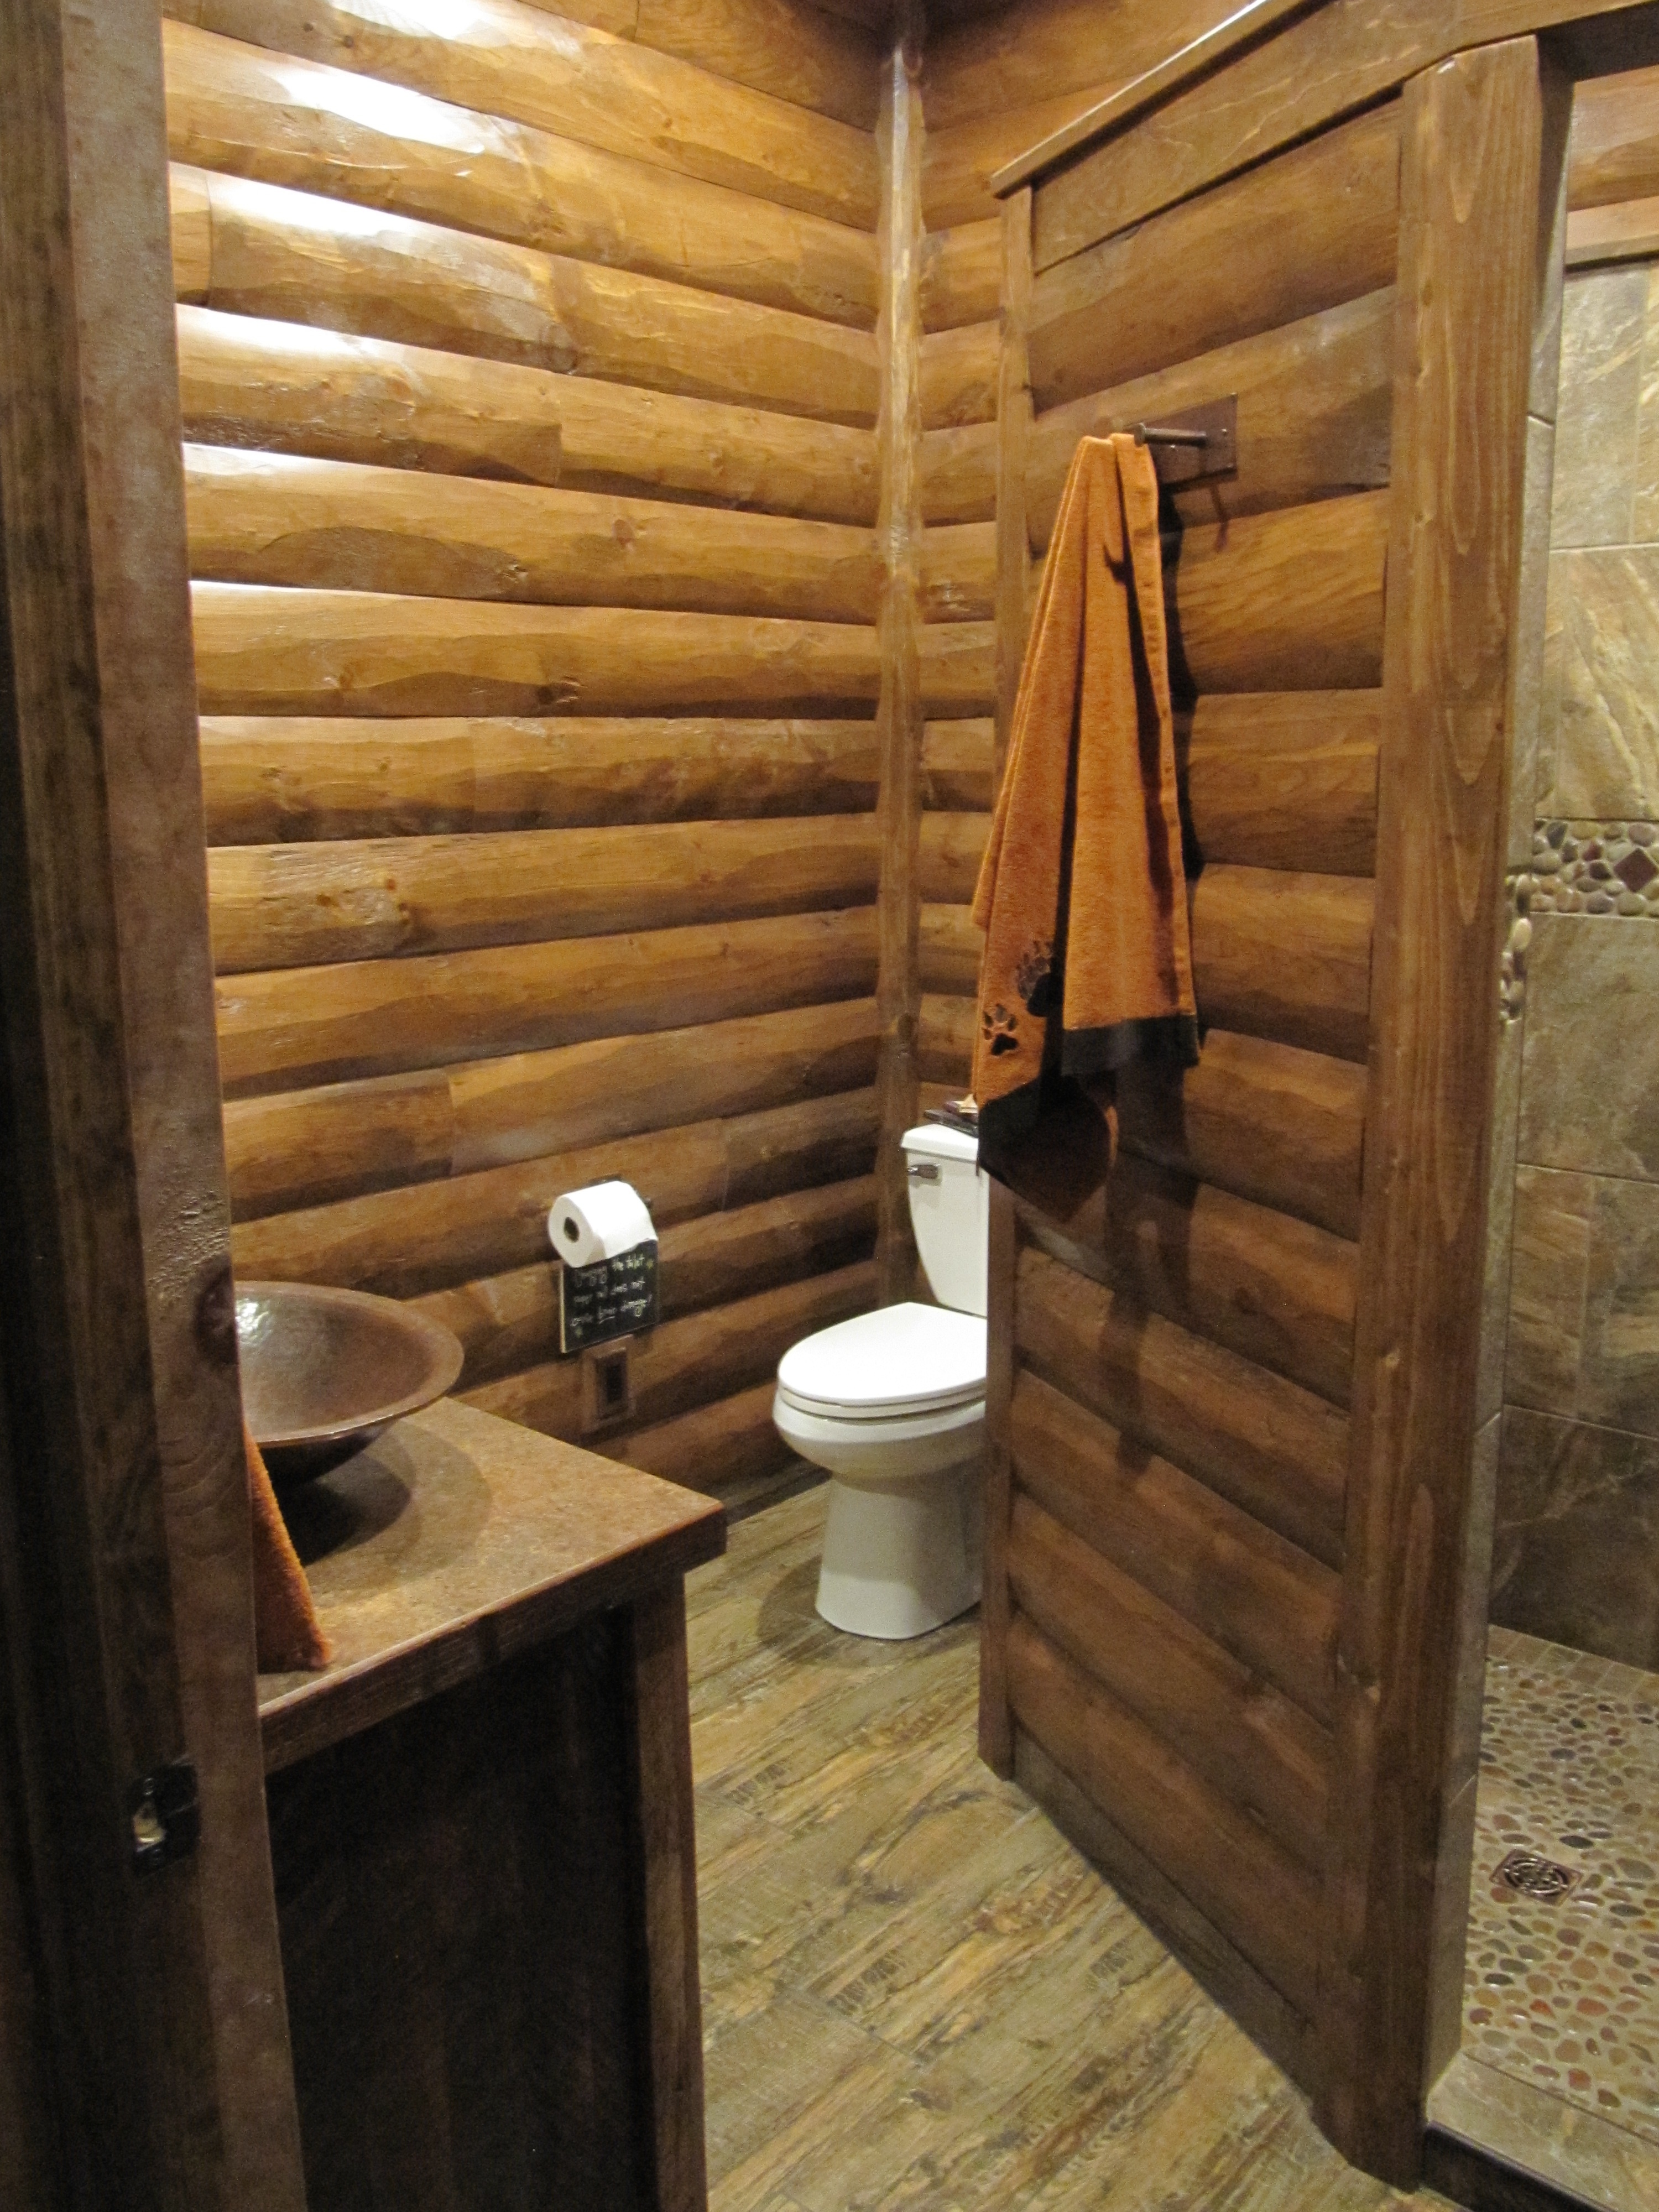 Bathroom with 2x8 pine log siding with pine D-trim, prestained chestnut.